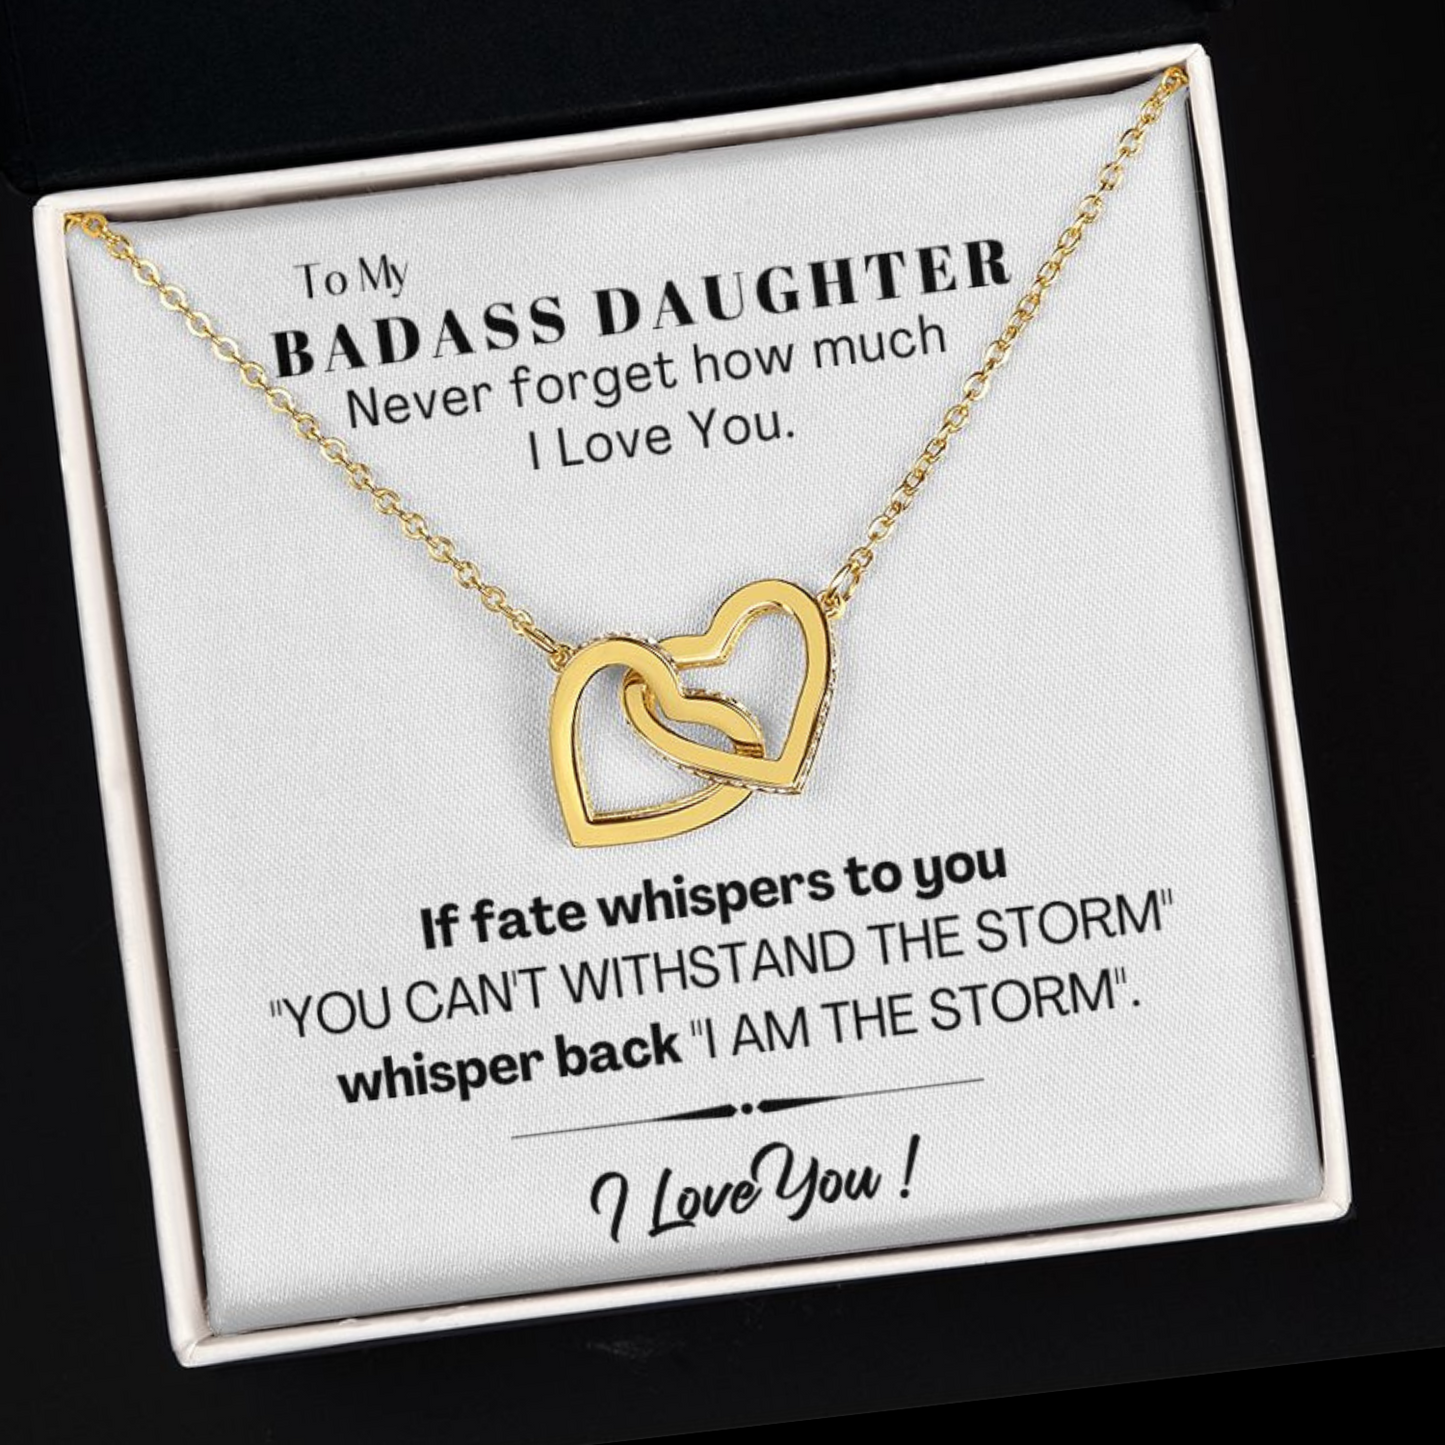 Badass Daughter-If fate whispers to you--Interlocking Hearts Necklace